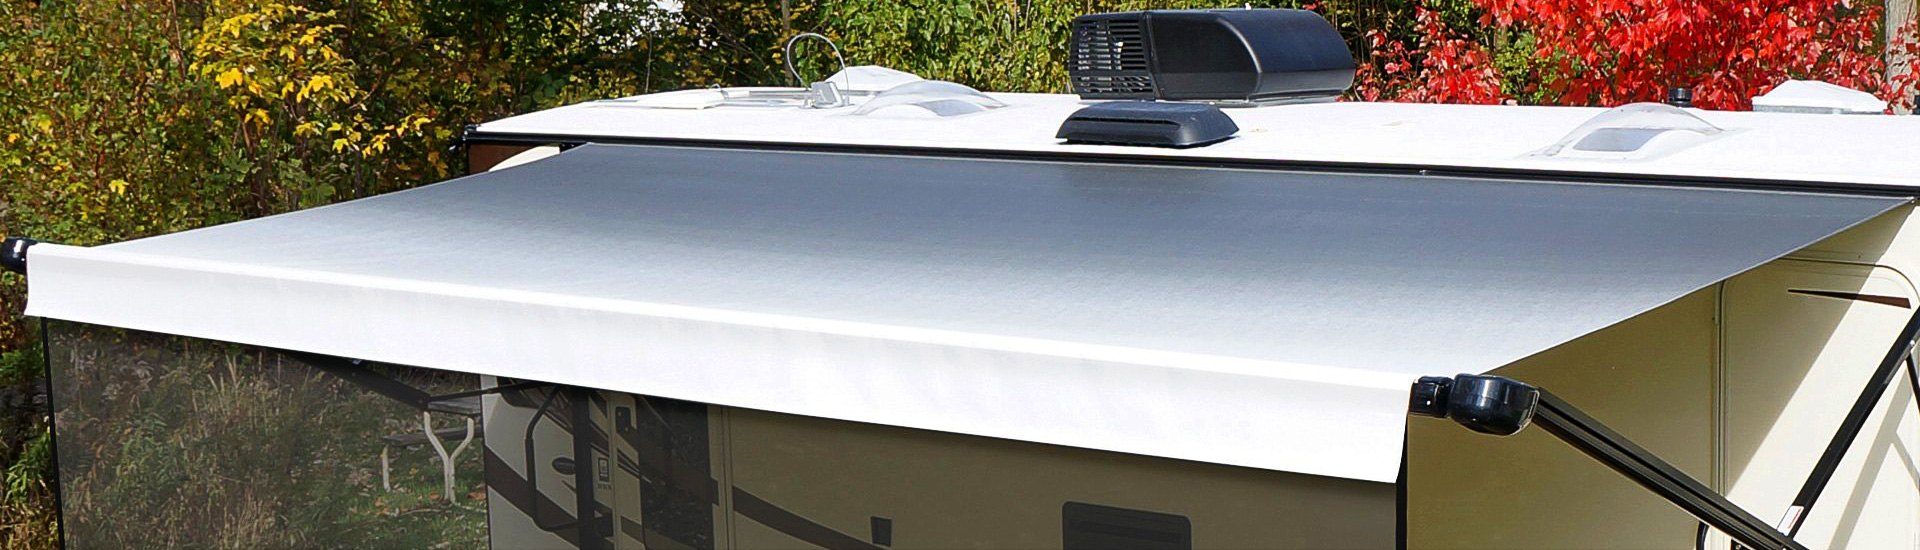 RV Awnings and Shades | Enjoy the Outdoors Out of the Heat & Glare